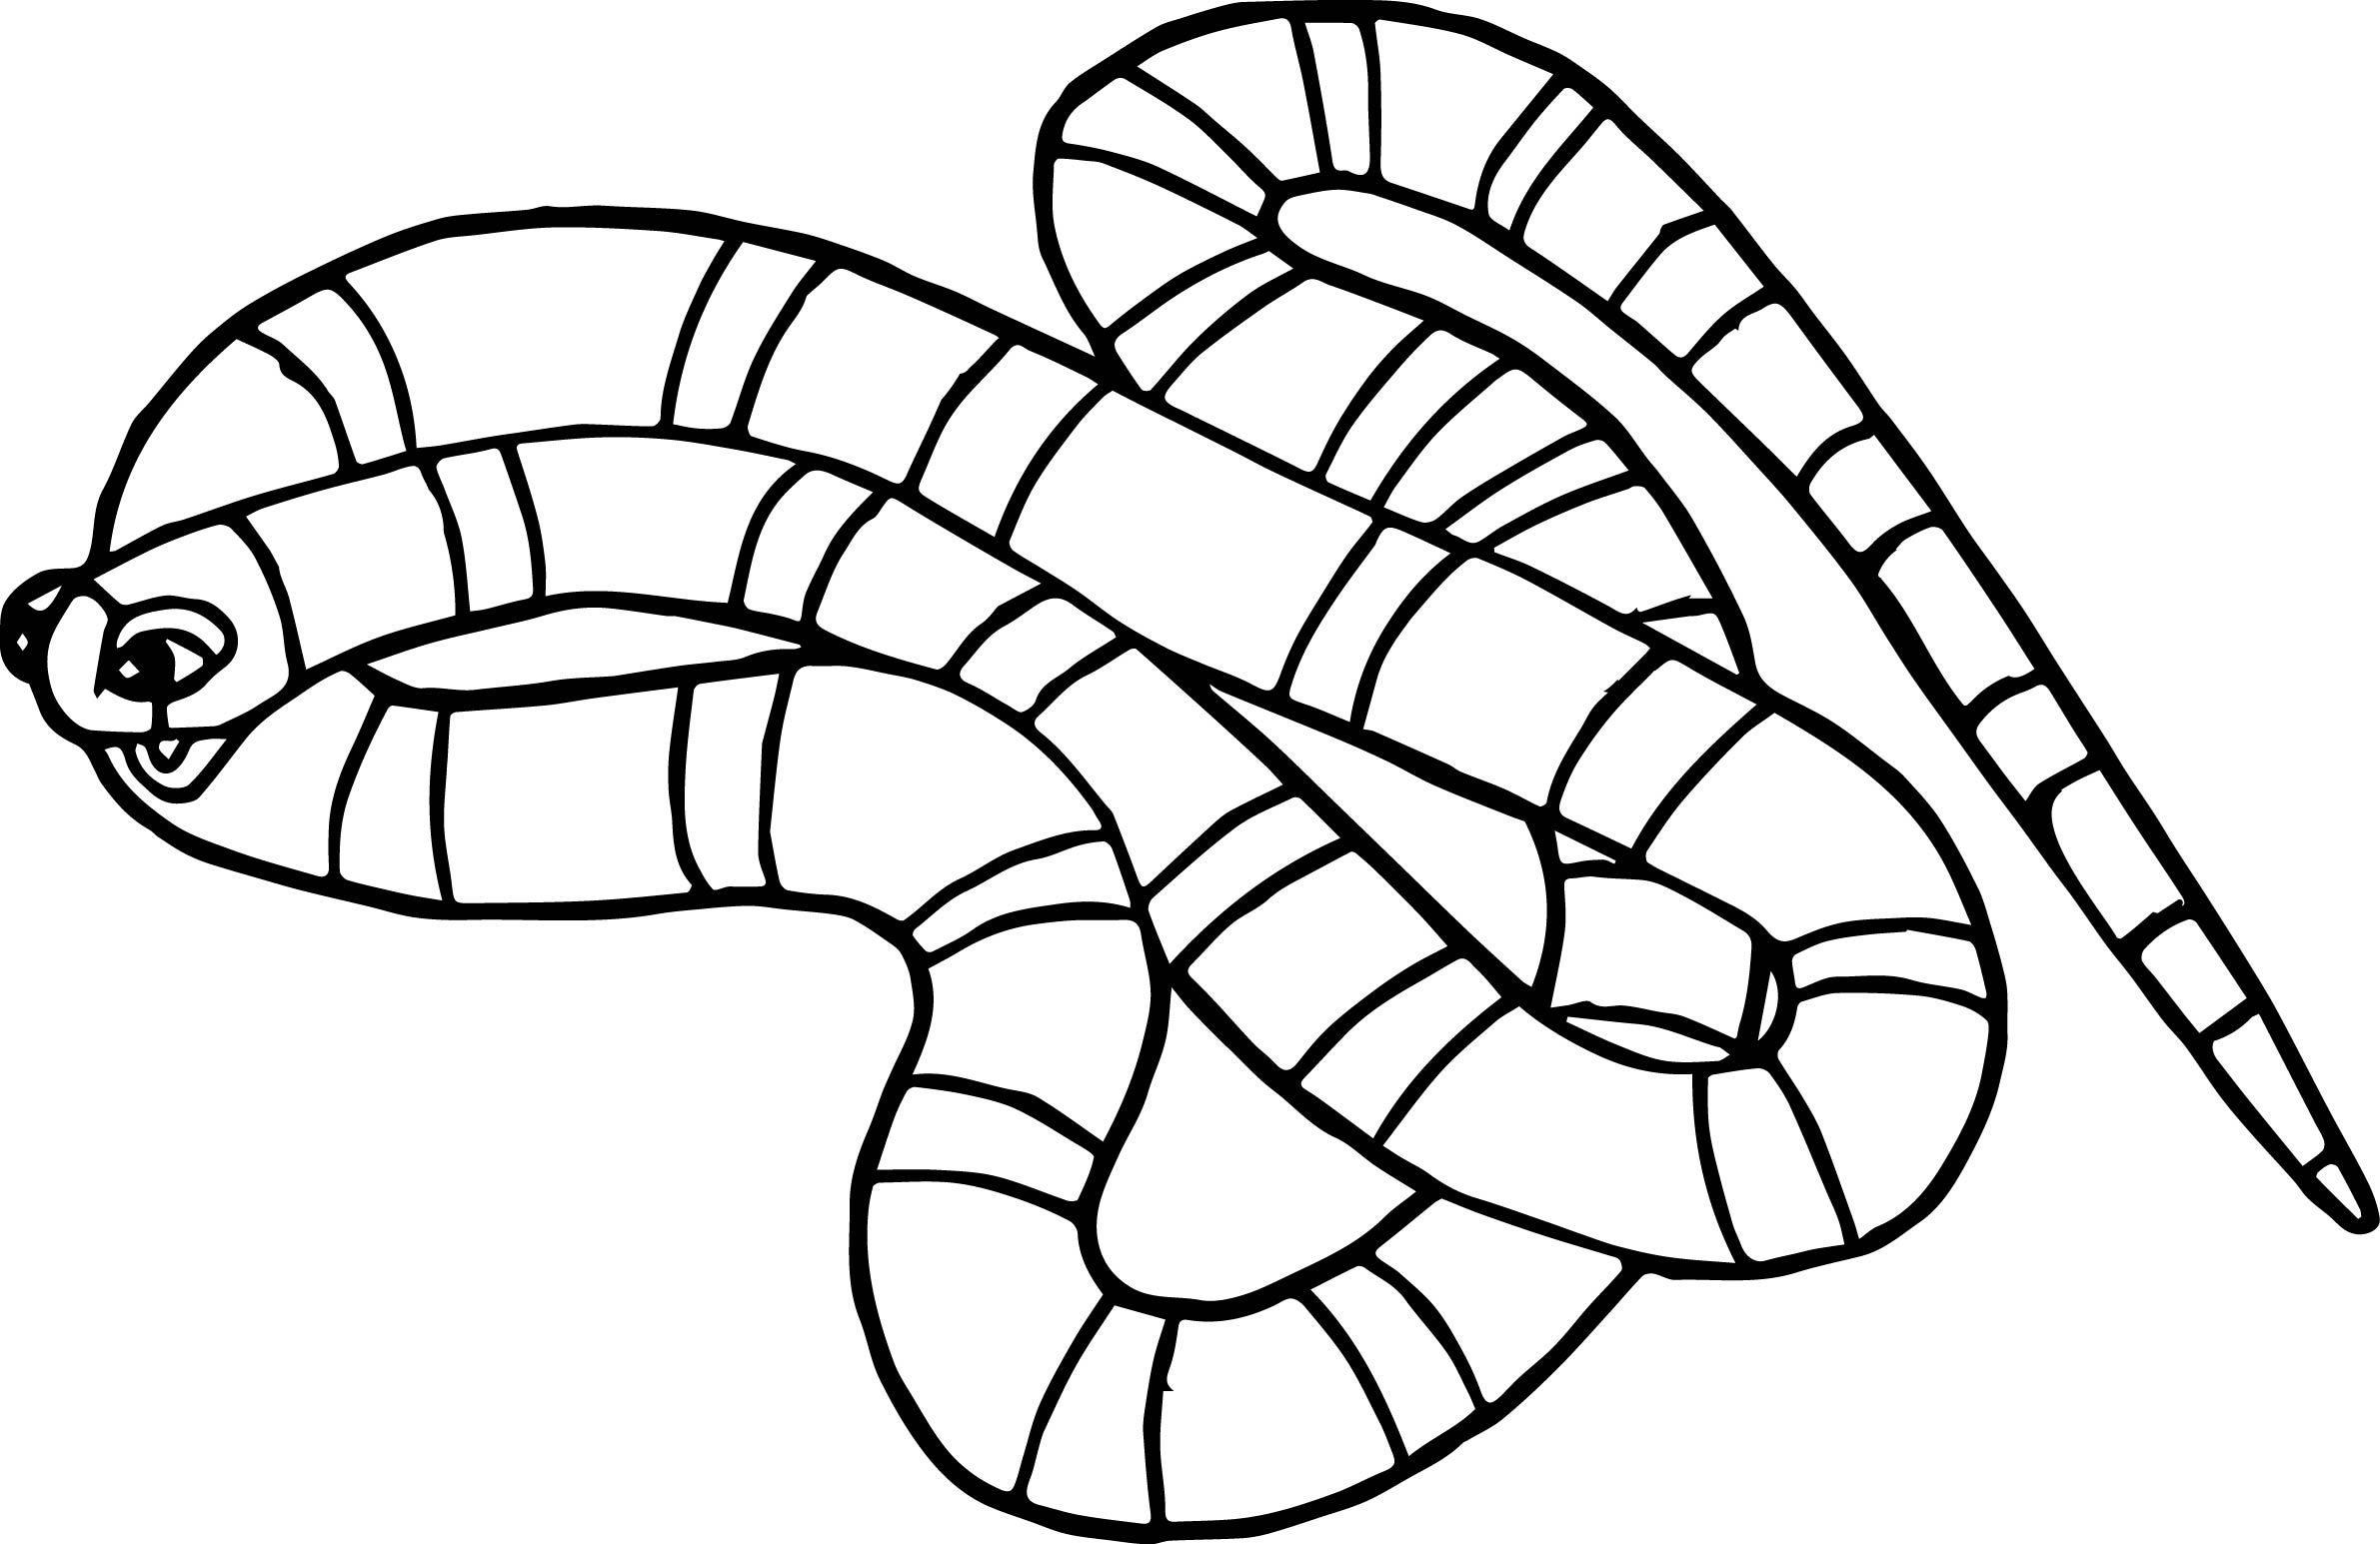 Rainforest Frog Coloring Page Rainforest Coral Snake Coloring Page Wecoloringpage